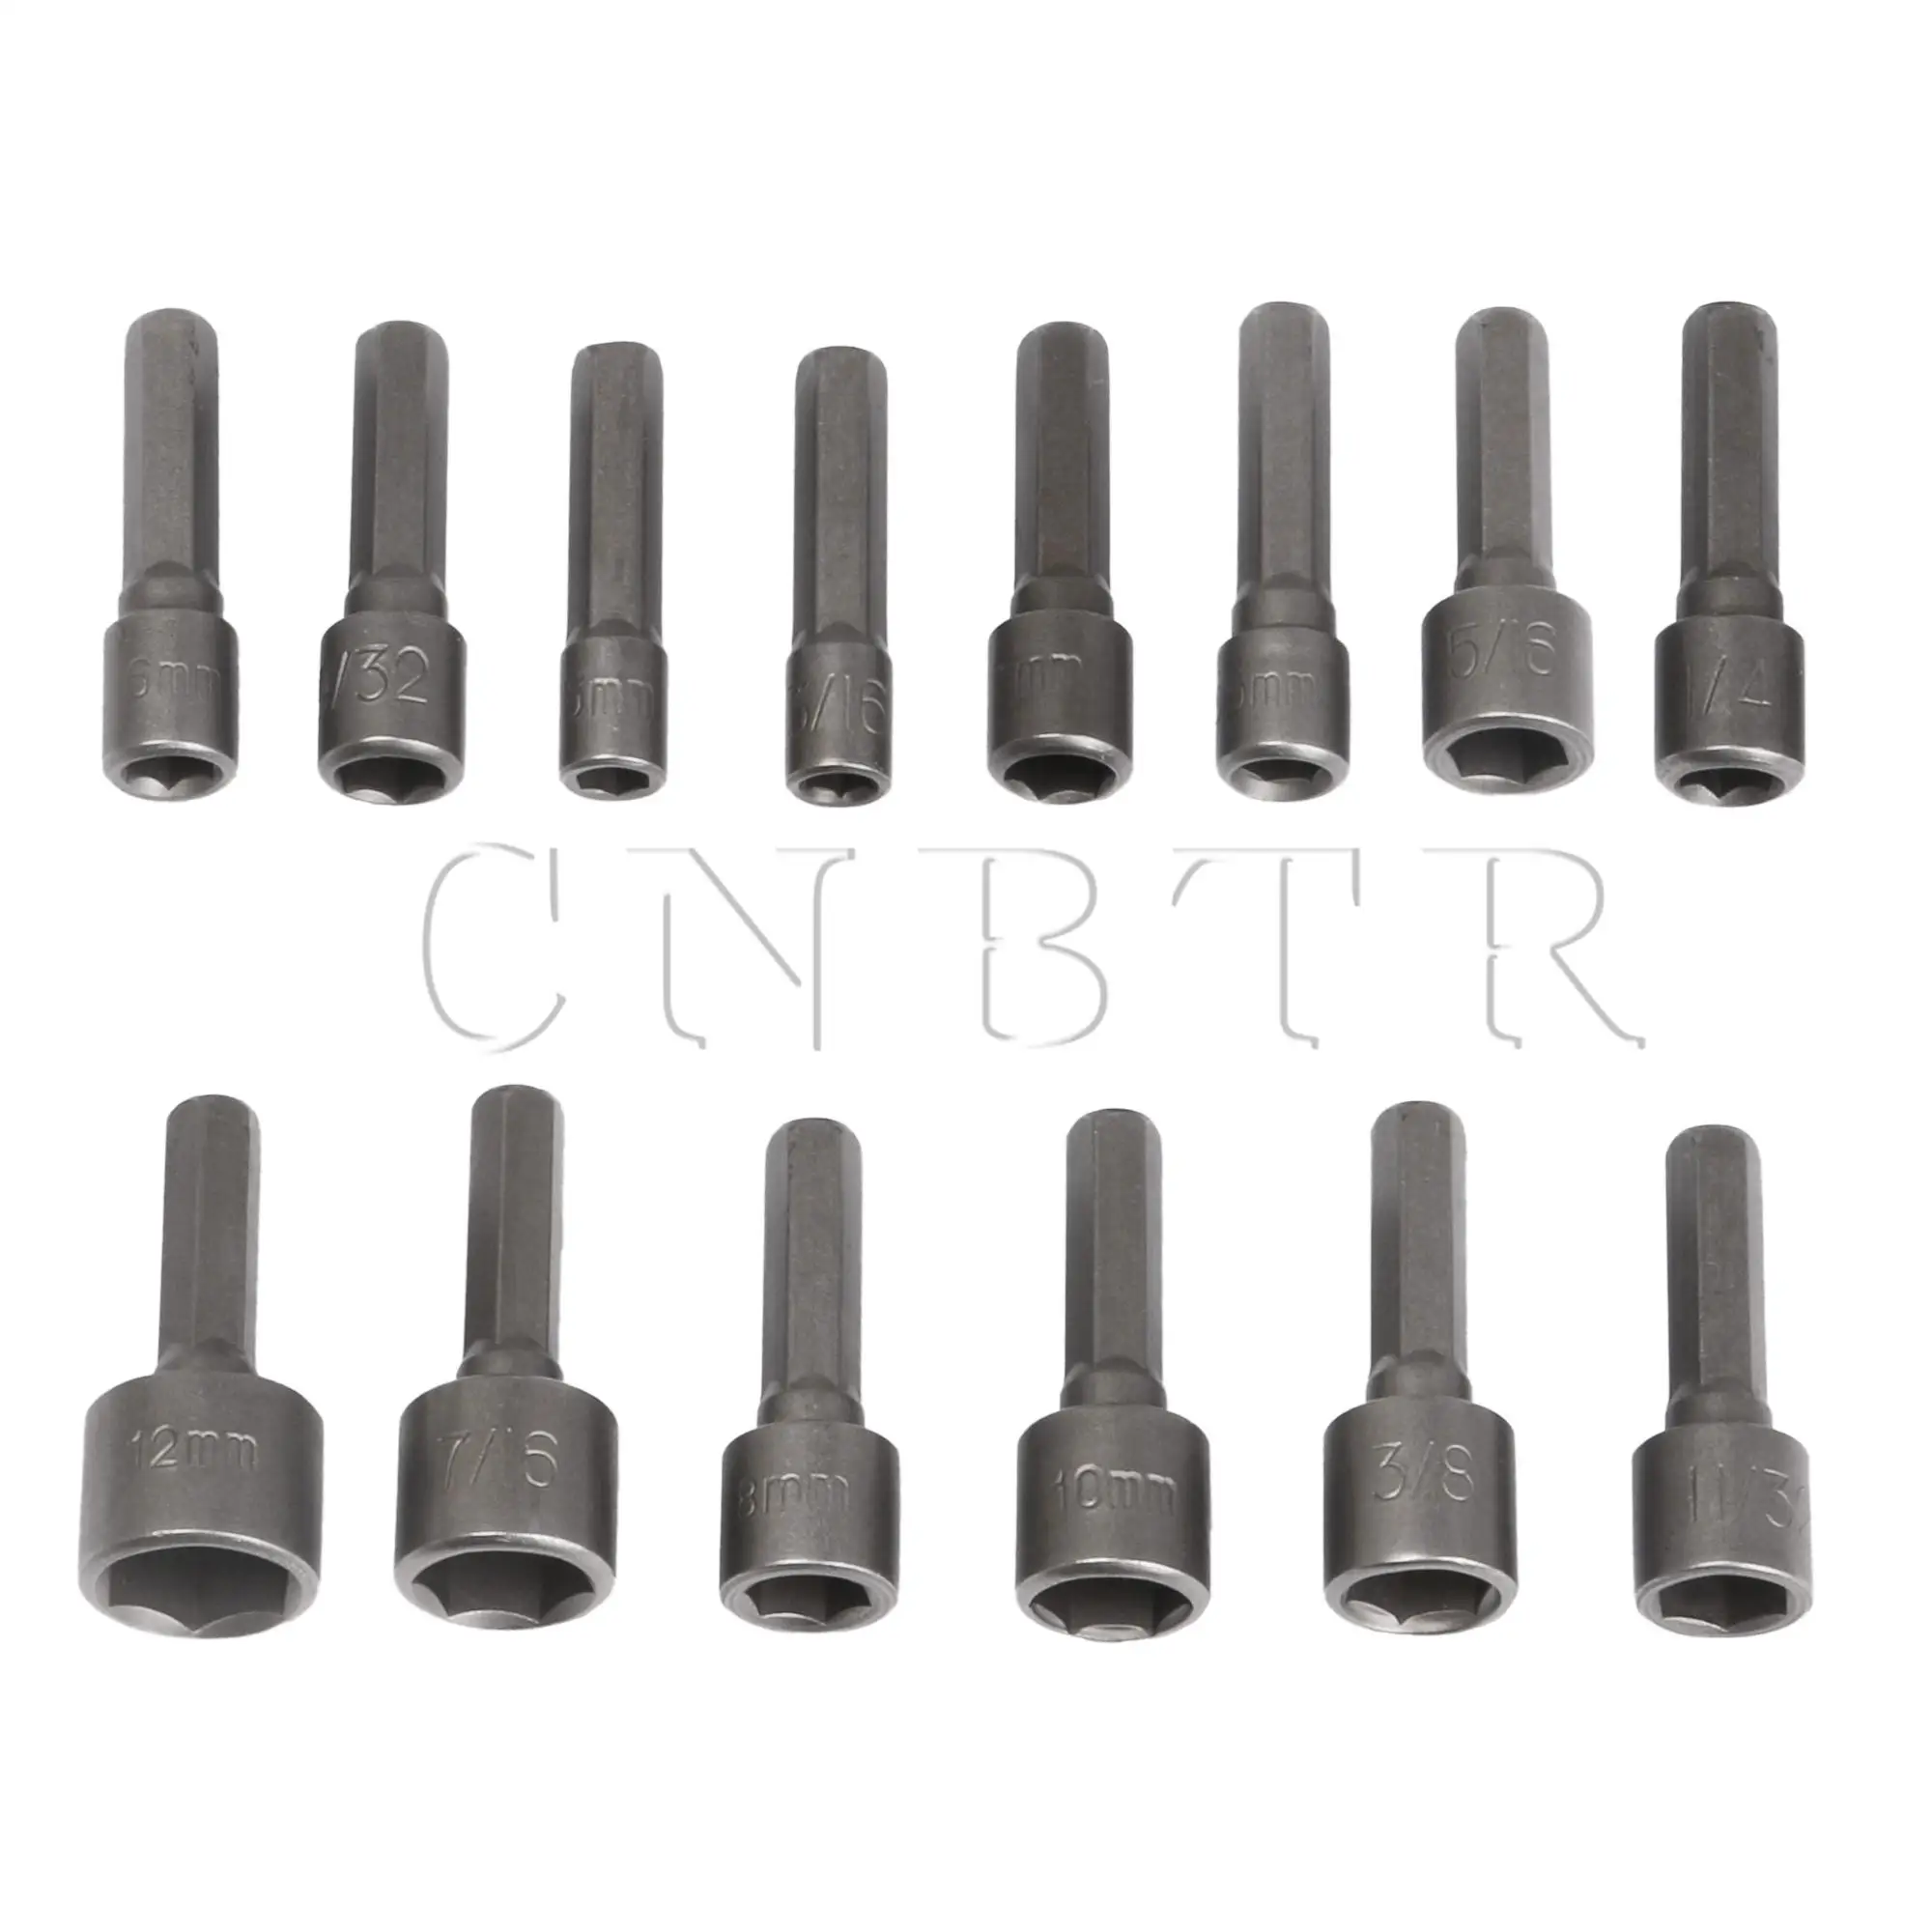 

CNBTR 14Pcs Power Nuts Hex Socket Drivers Screw Wrenches Repairing Drill Part